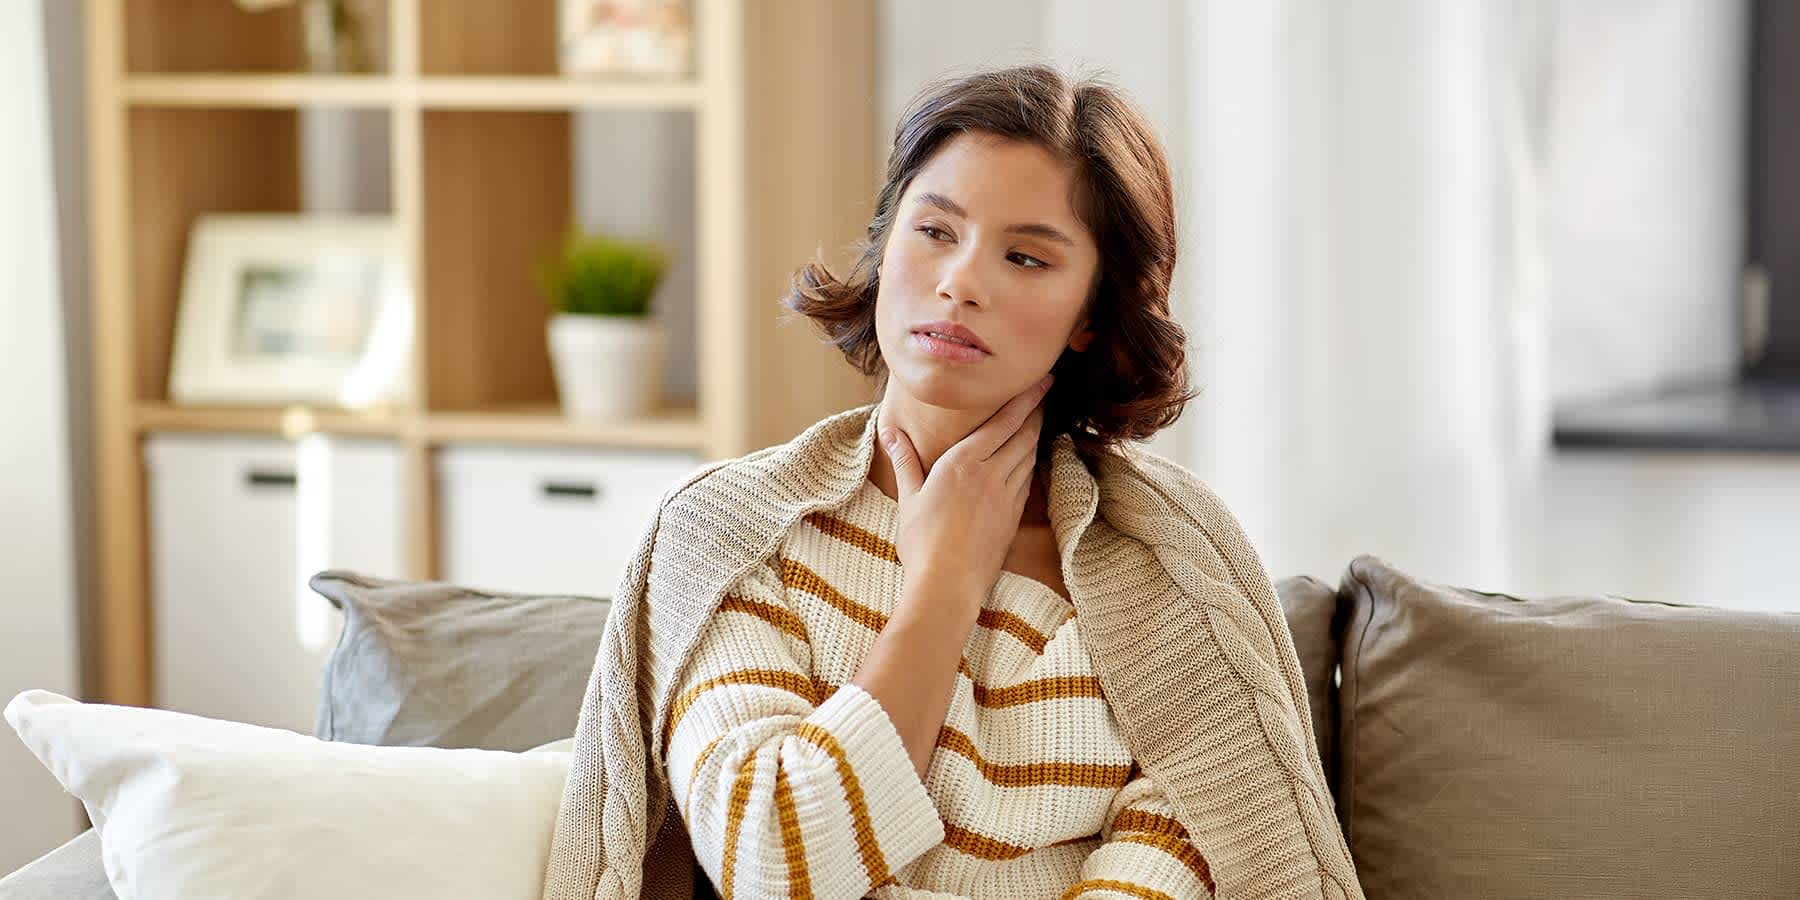 Young woman sitting on couch and feeling throat while experiencing symptoms of oral gonorrhea